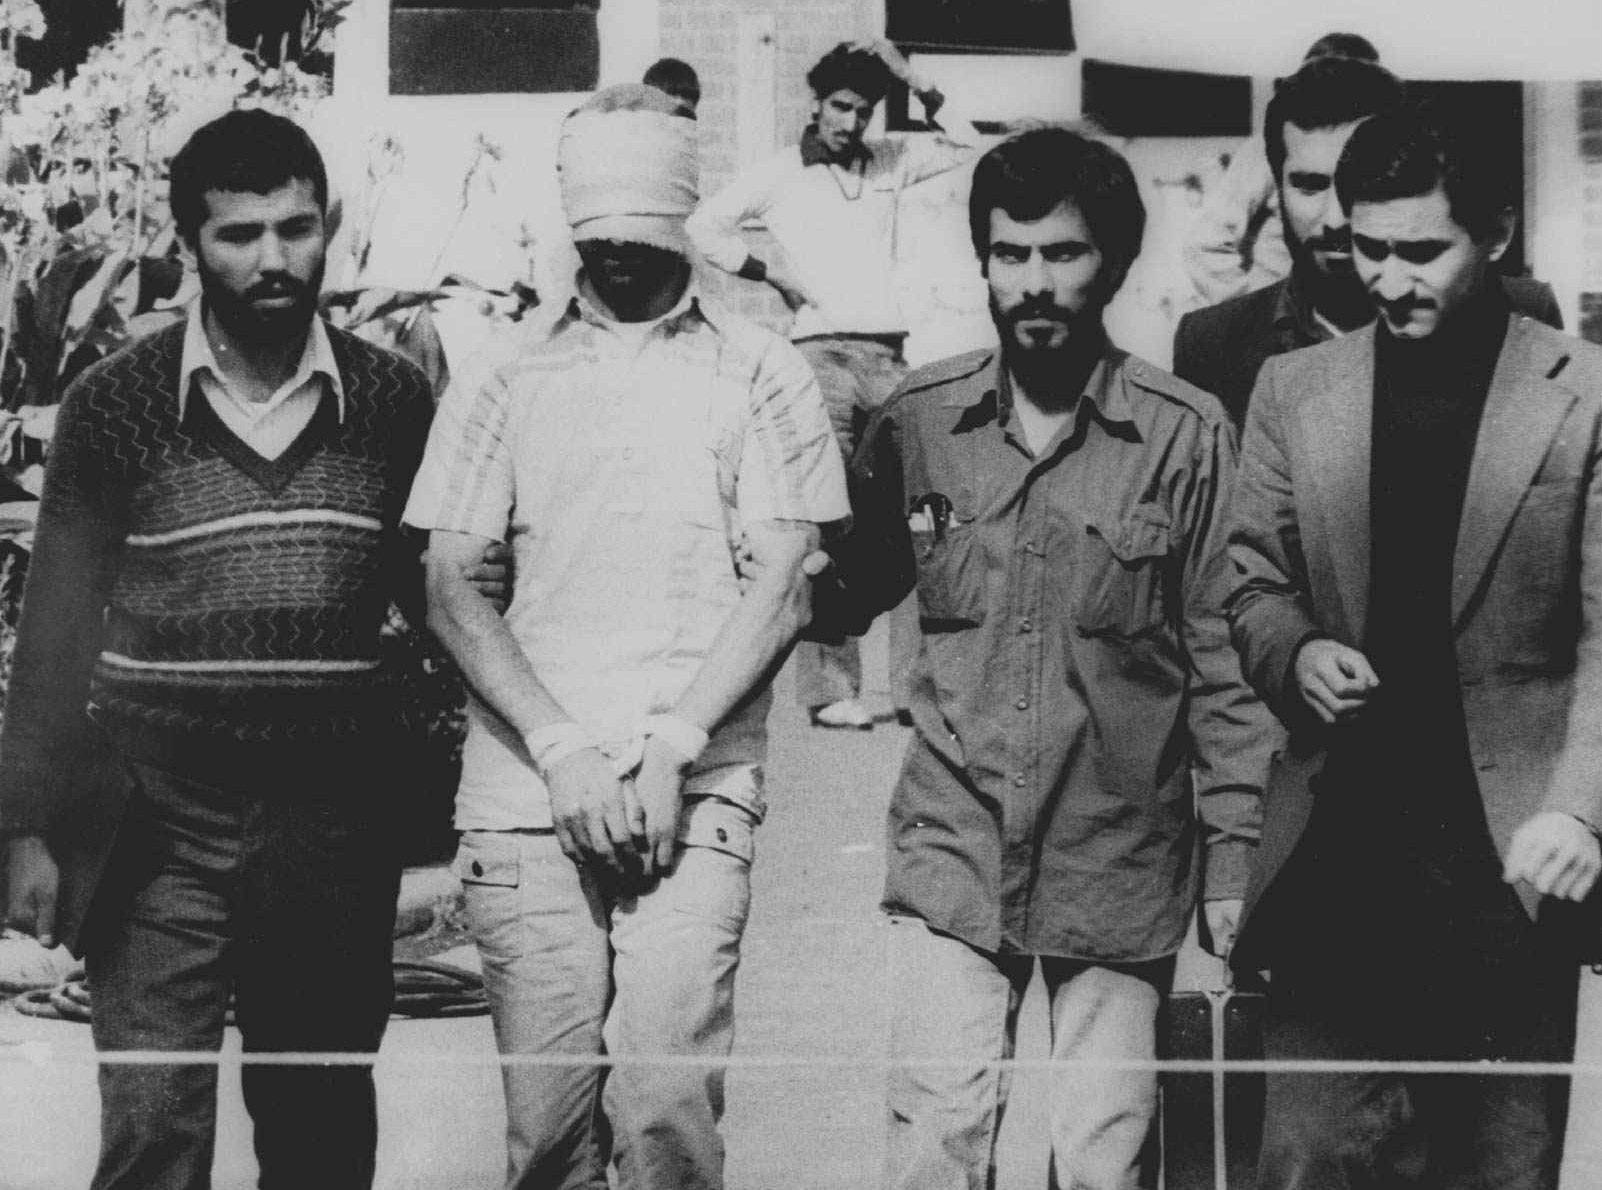 One of 60 U.S. hostages, blindfolded and with his hands bound, is being displayed to the crowd outside the U.S. Embassy in Tehran by Iranian hostage takers, Nov. 9, 1979.